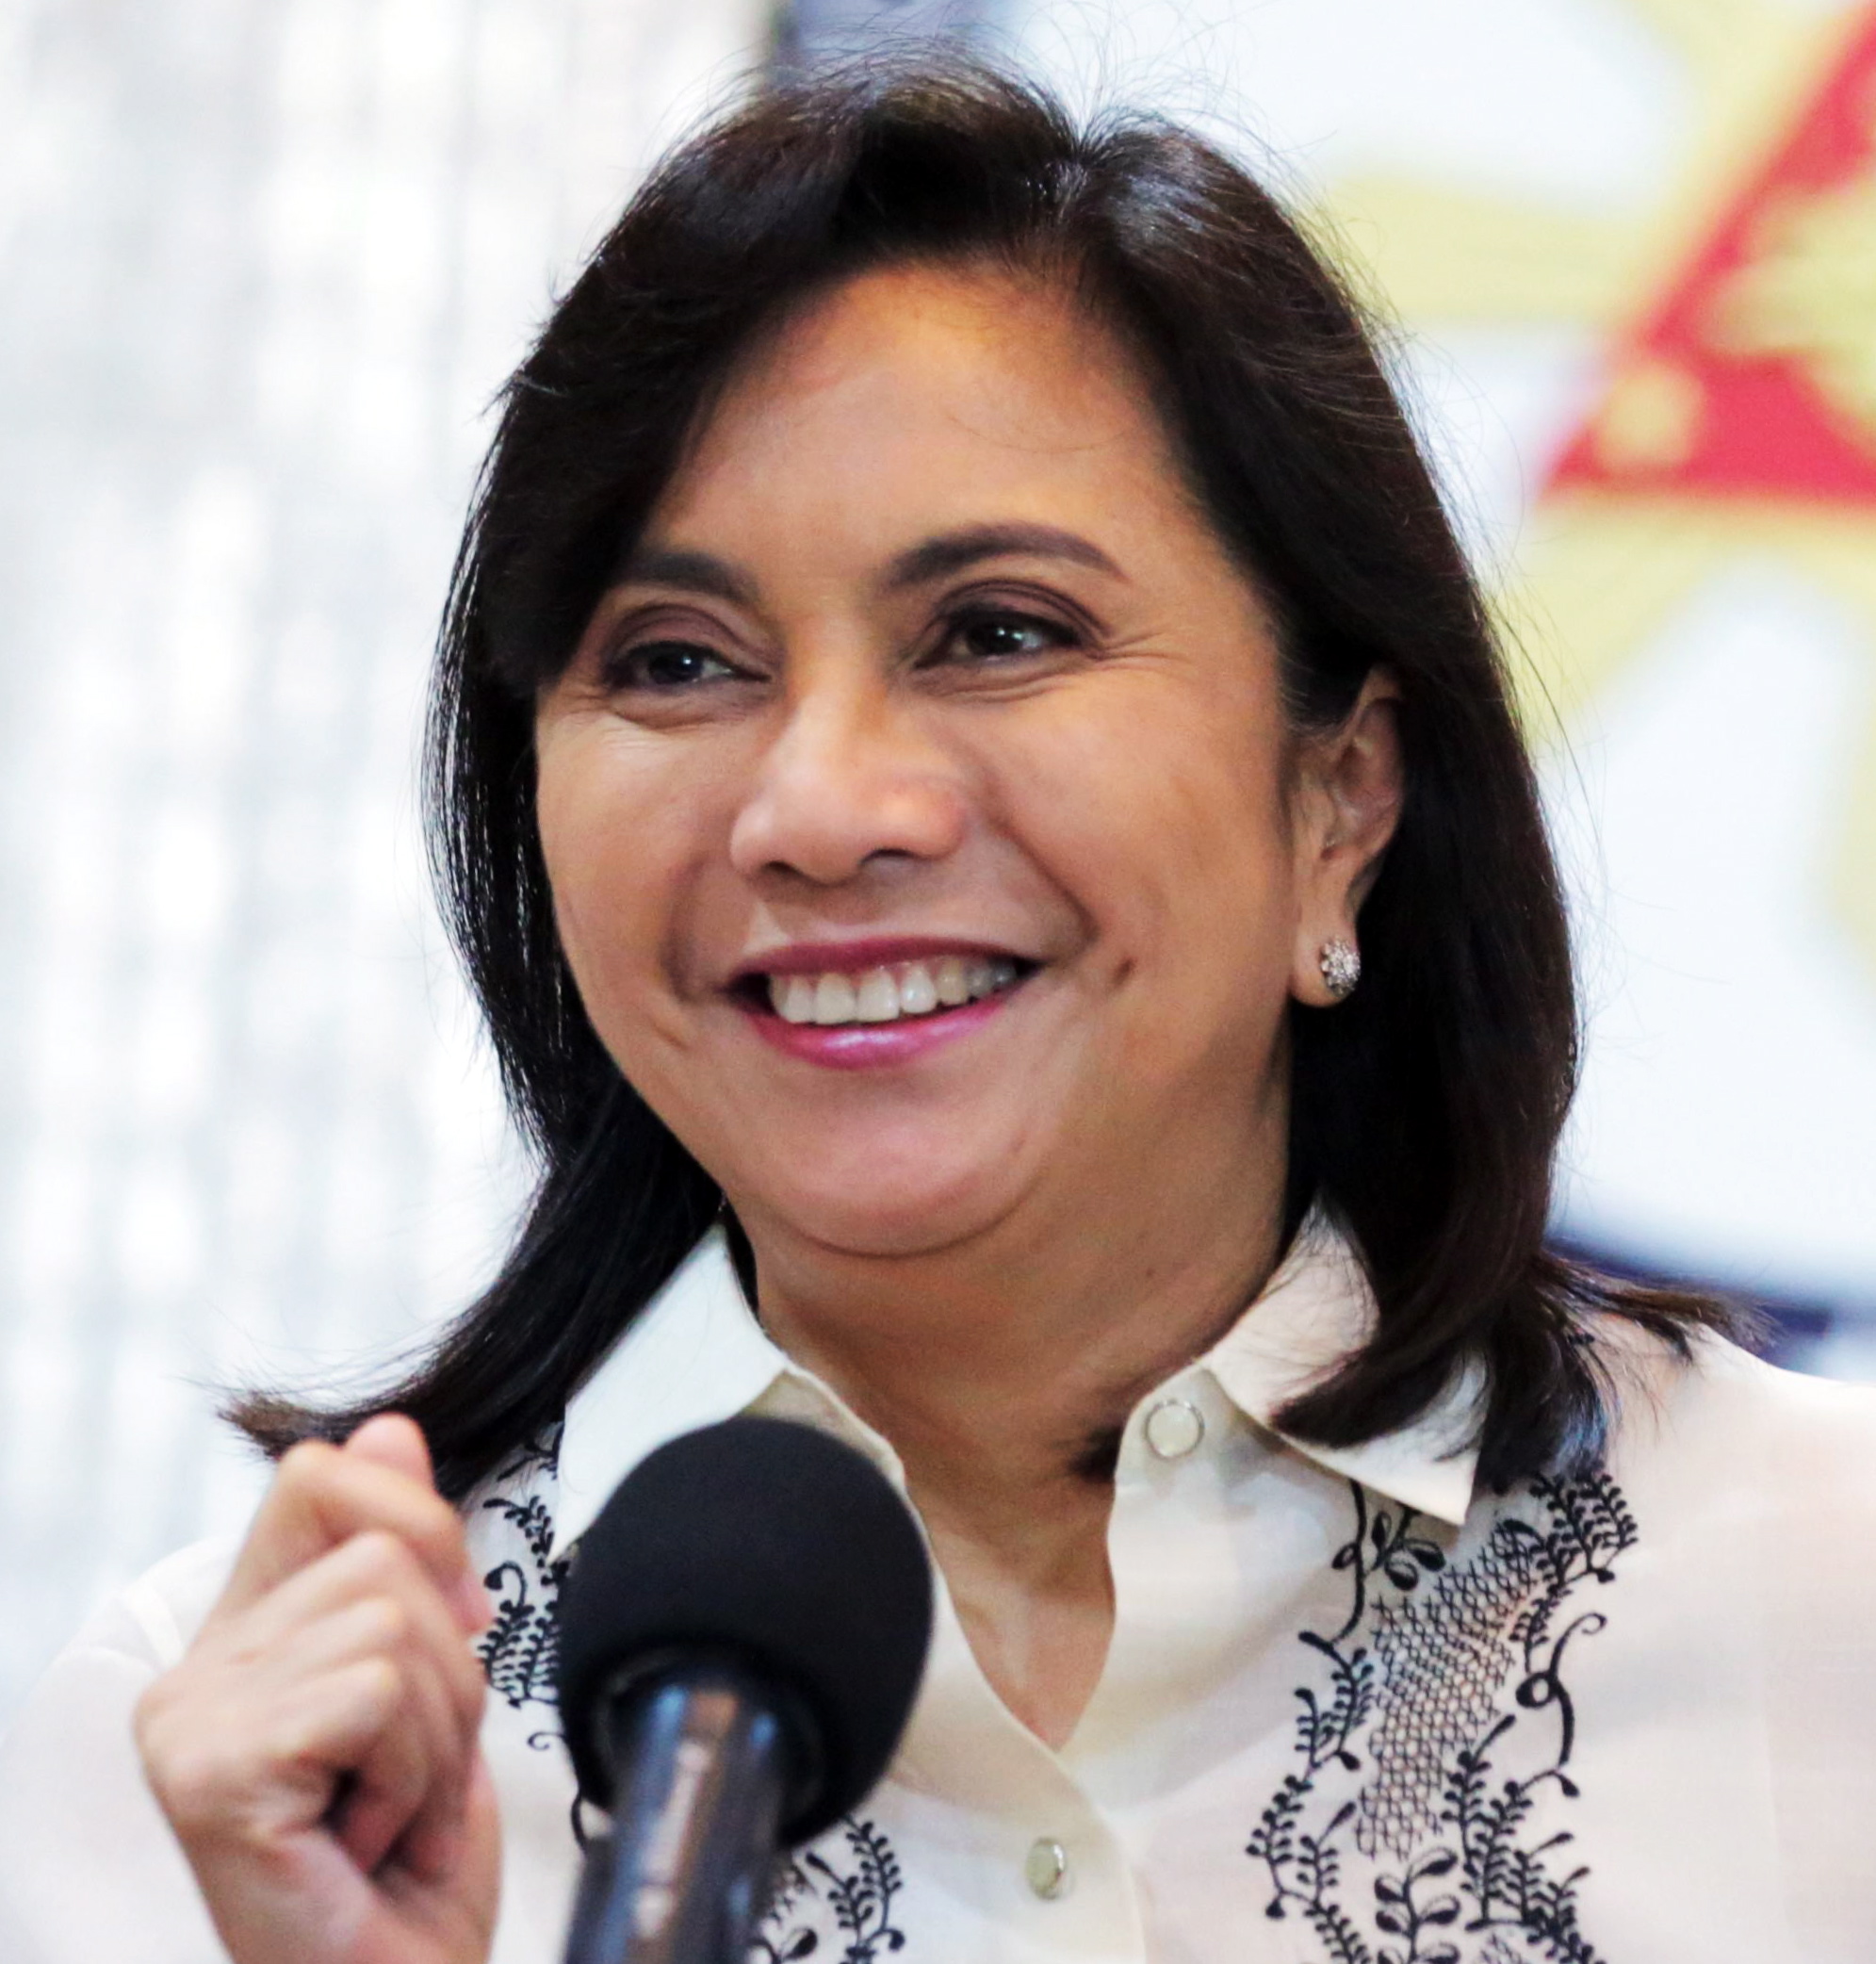 Vice President Leni Robredo has yet to share her final decision on her plans for 2022, including her possible presidential run, her spokesperson said Friday as the filing for certificate of candidacy for next year’s elections rolls out.